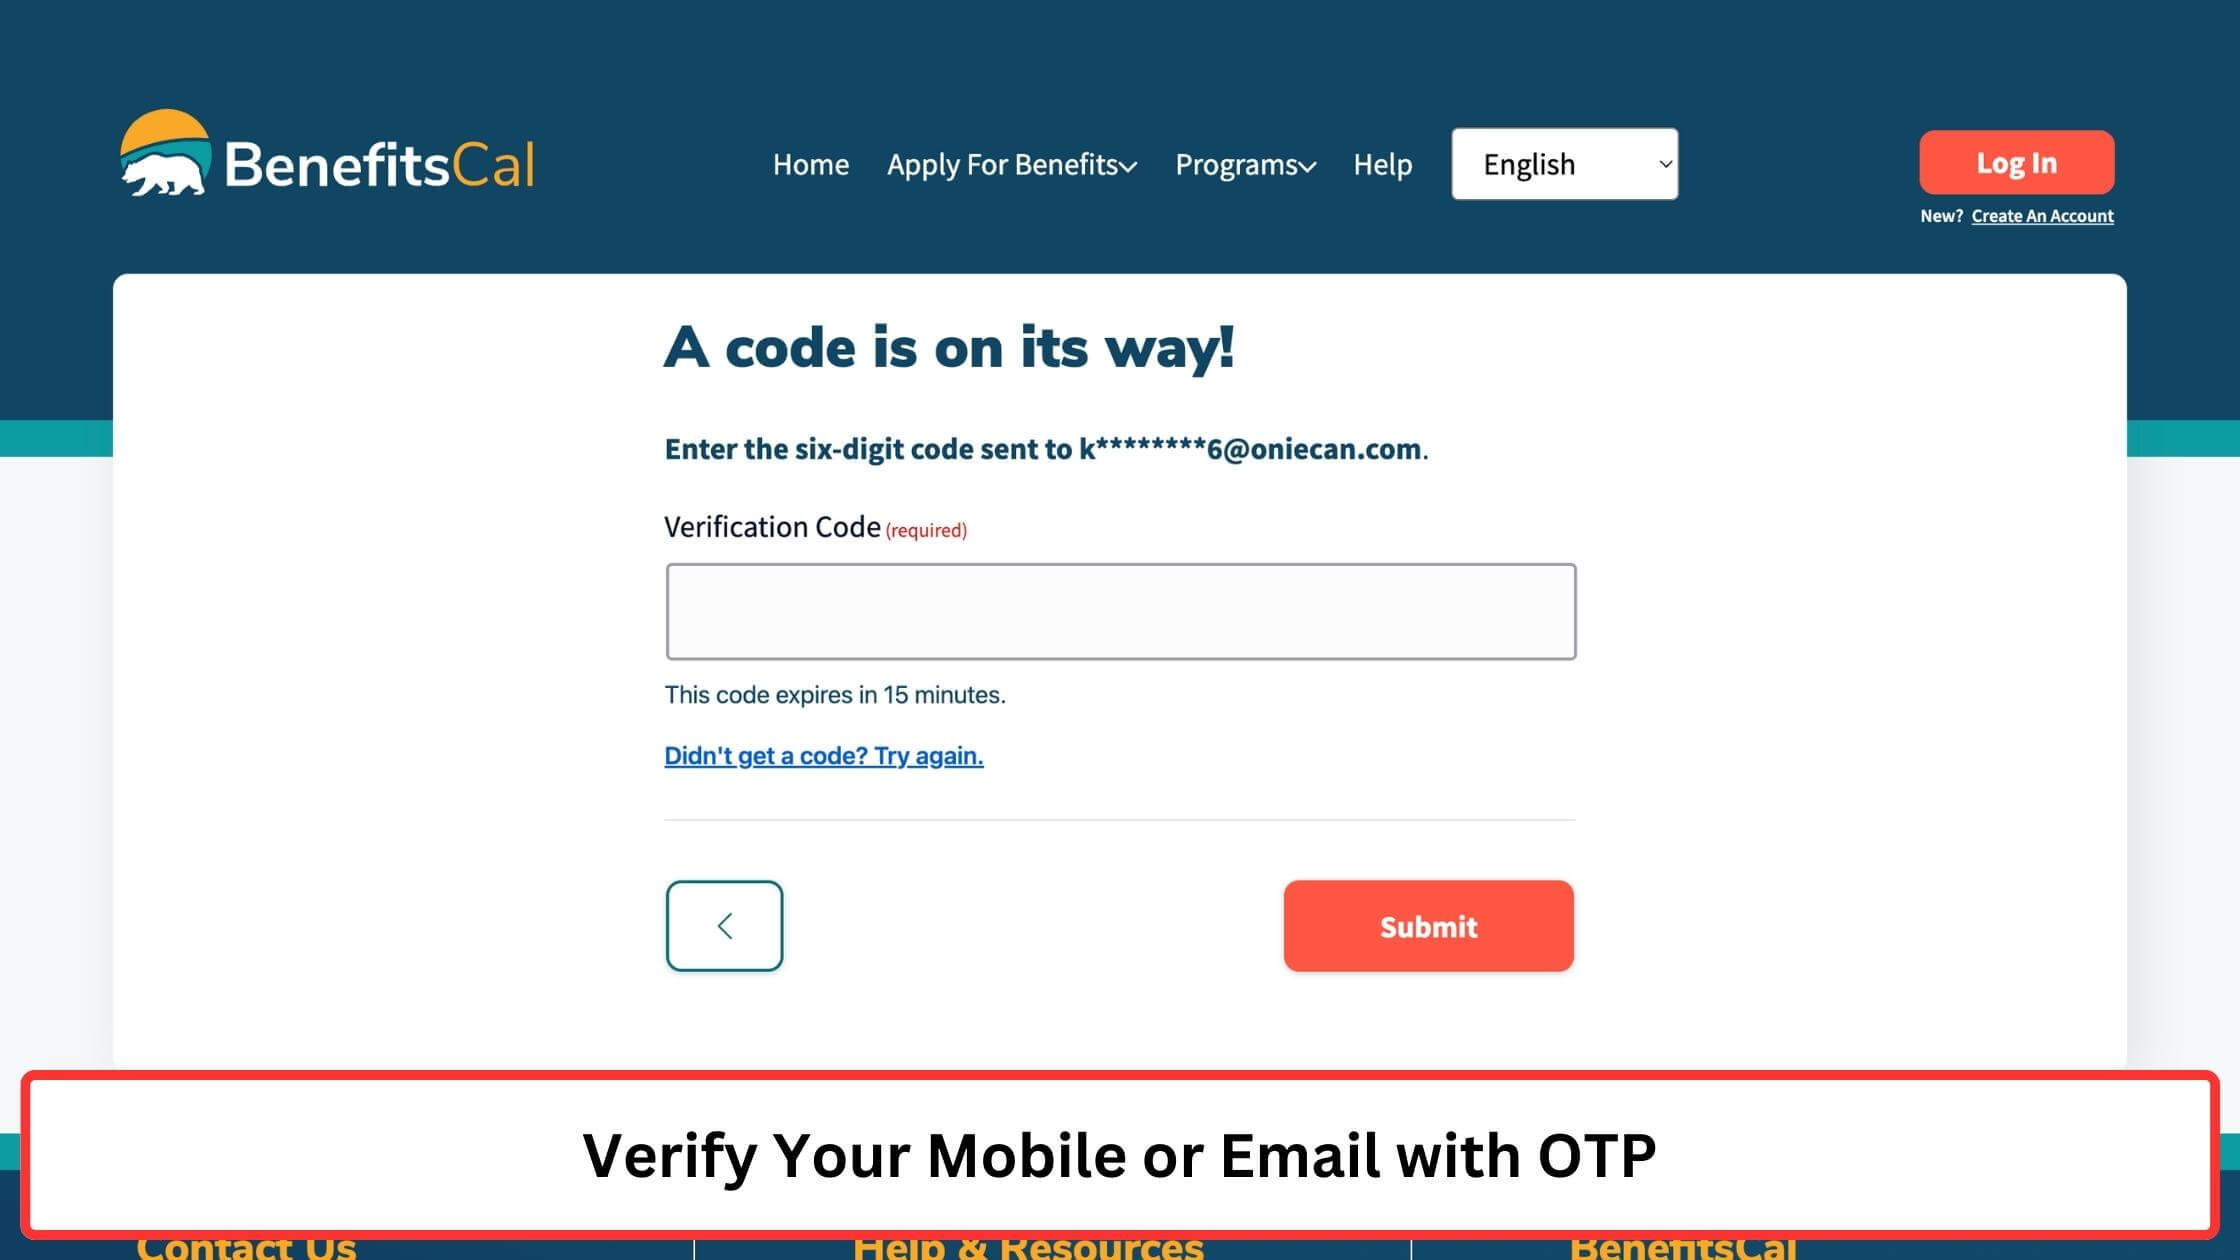 Verify Your Email and Mobile